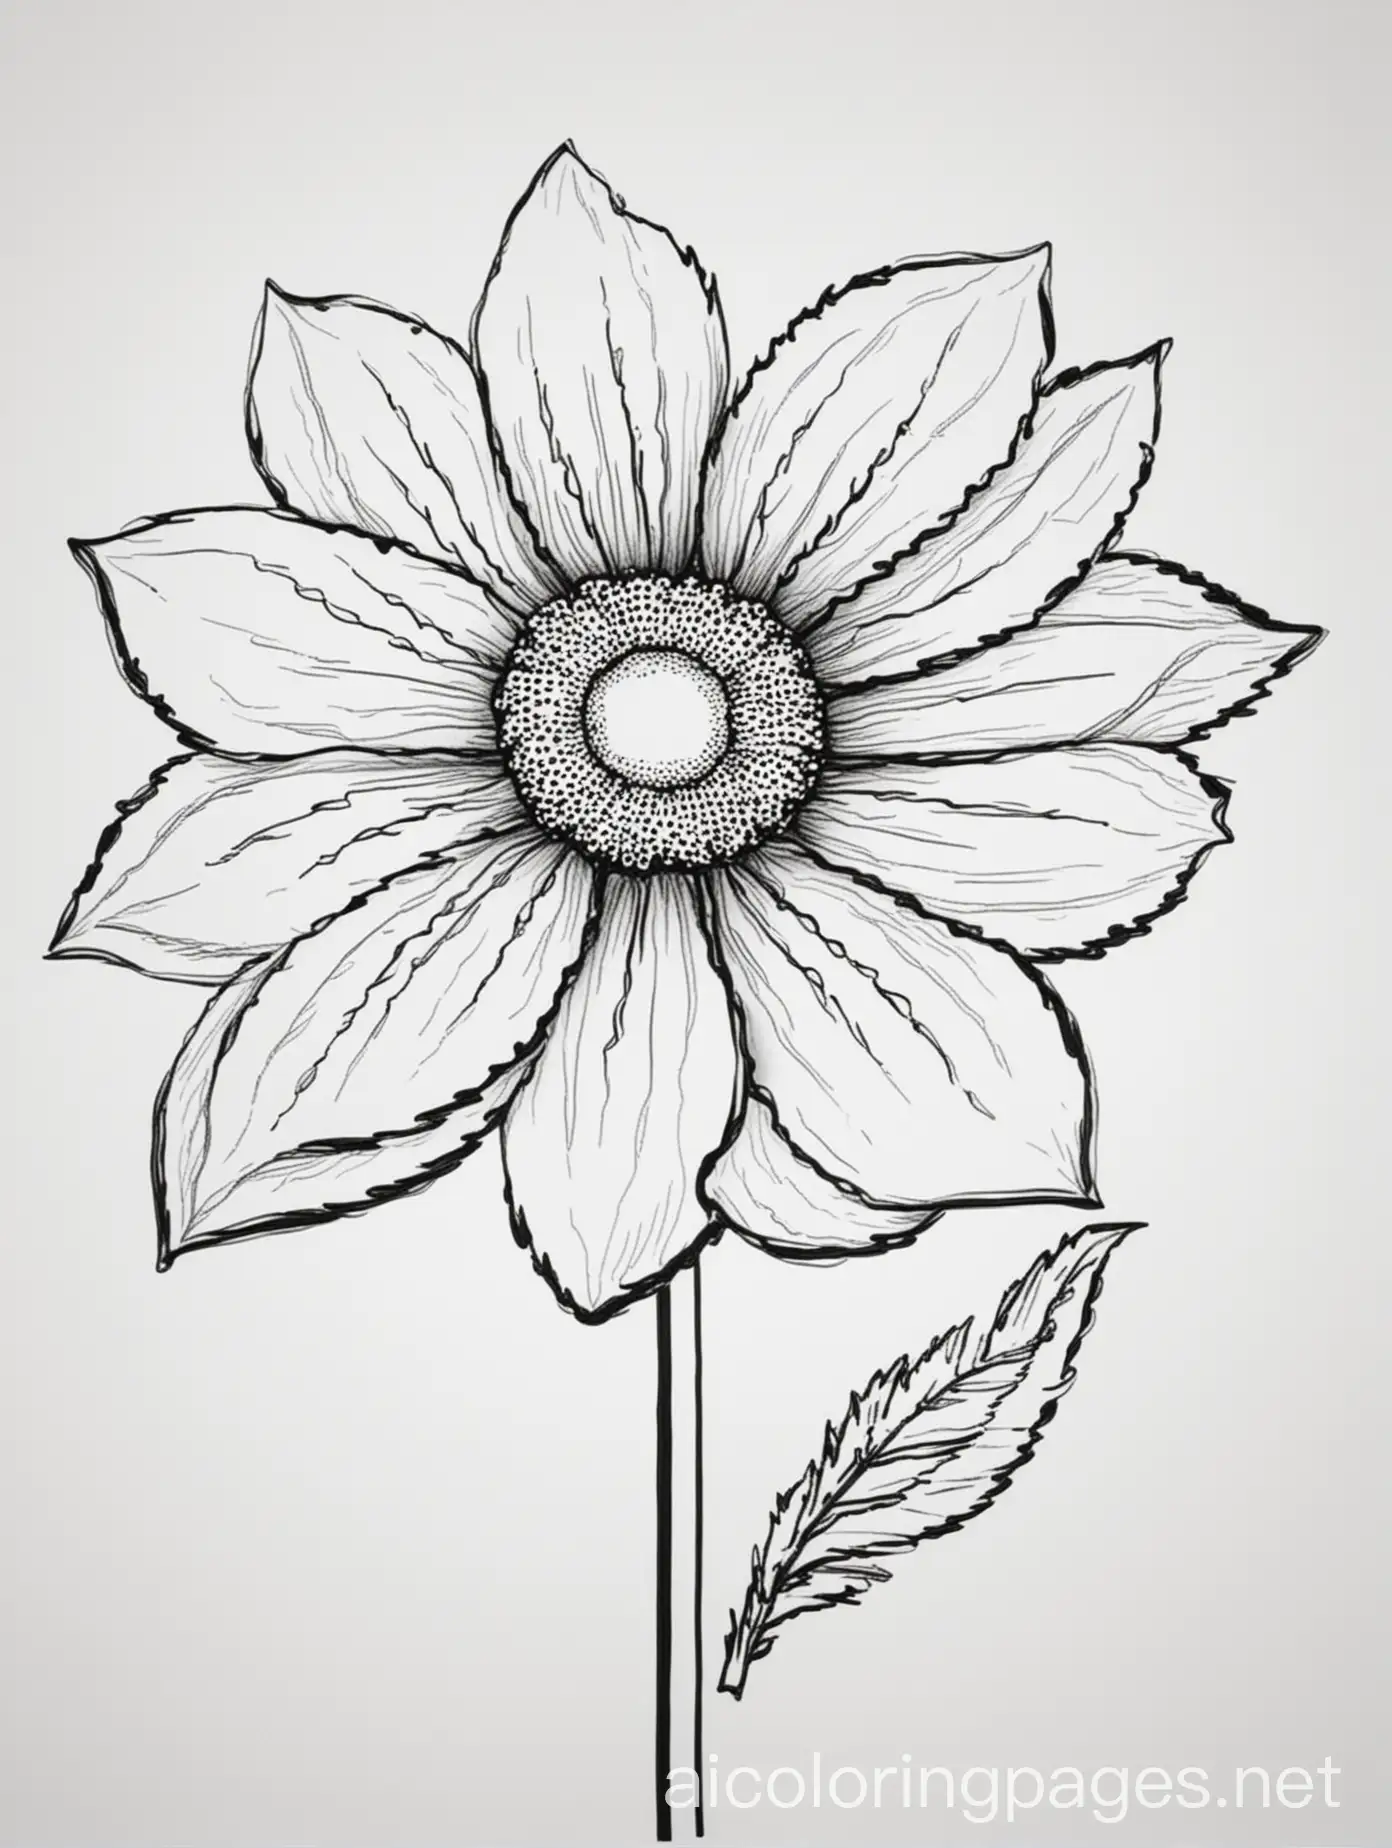 a flower picture 
, Coloring Page, black and white, line art, white background, Simplicity, Ample White Space. The background of the coloring page is plain white to make it easy for young children to color within the lines. The outlines of all the subjects are easy to distinguish, making it simple for kids to color without too much difficulty